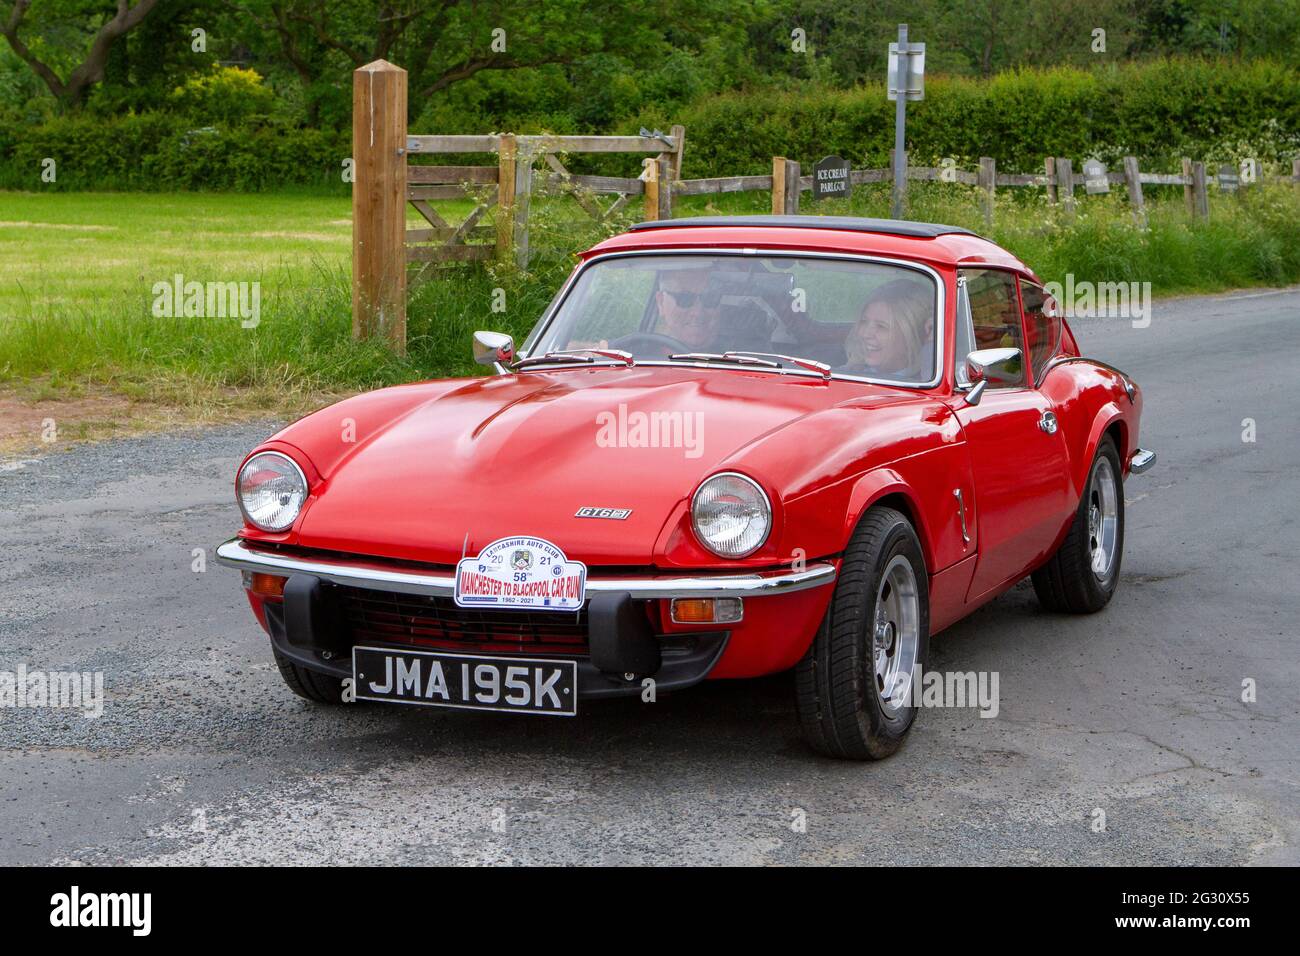 A Red Triumph Gt6 coupe Annual Manchester to Blackpool Vintage & Classic Car Run The event is a ‘Touring Assembly’ Stock Photo